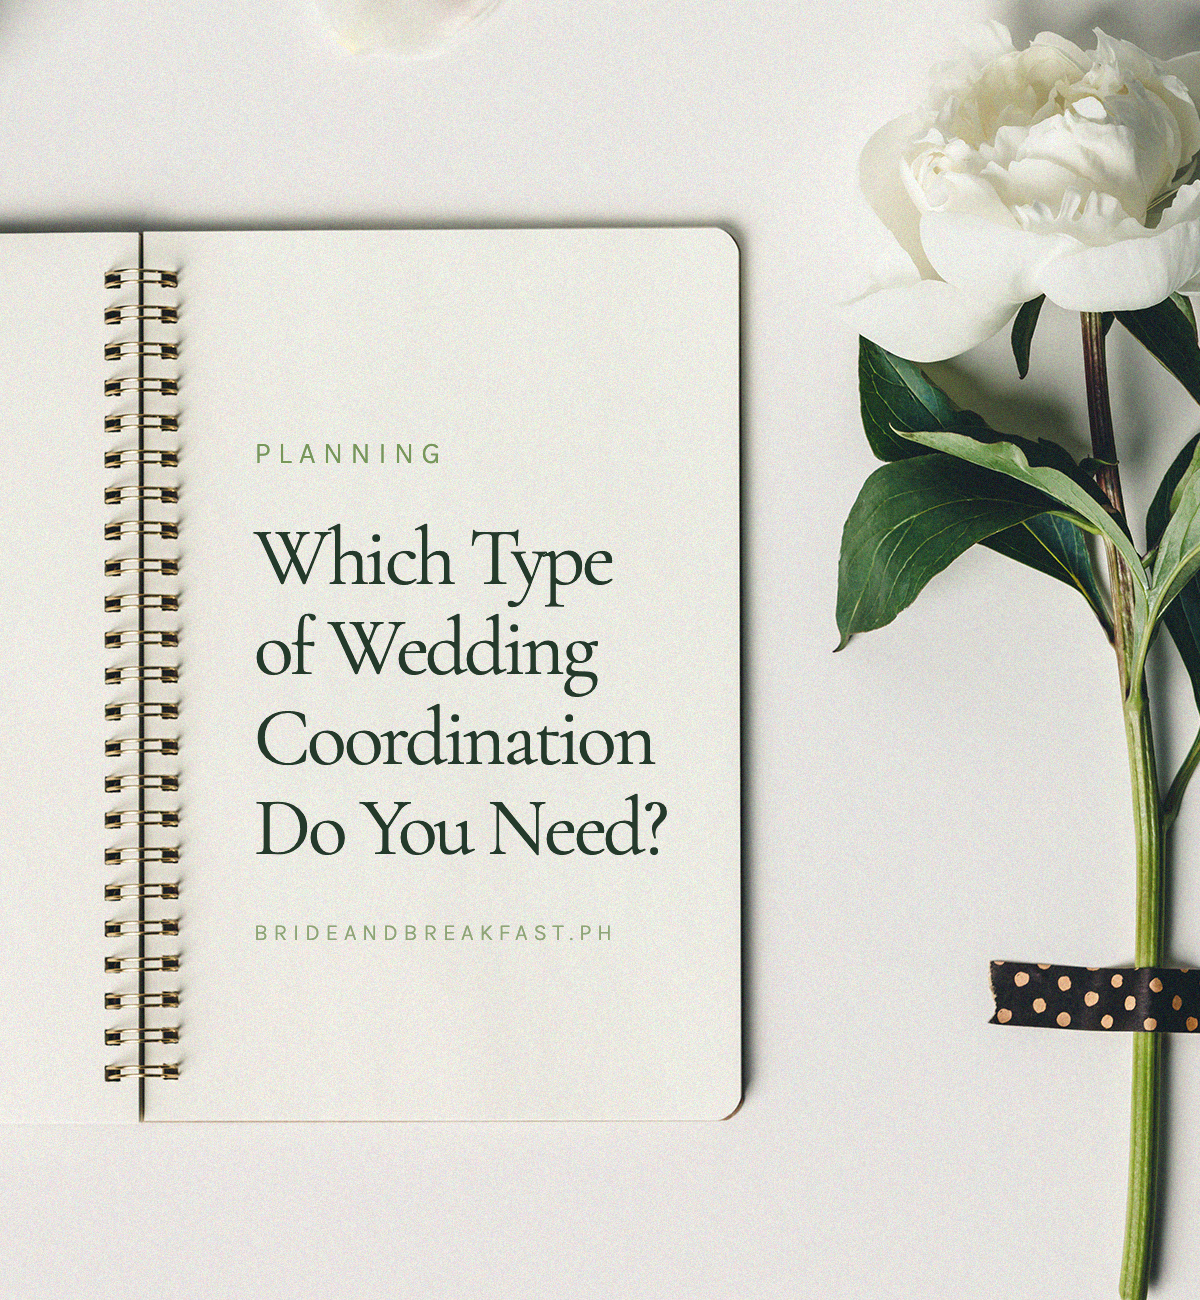 Which Type of Wedding Coordination Do You Need?